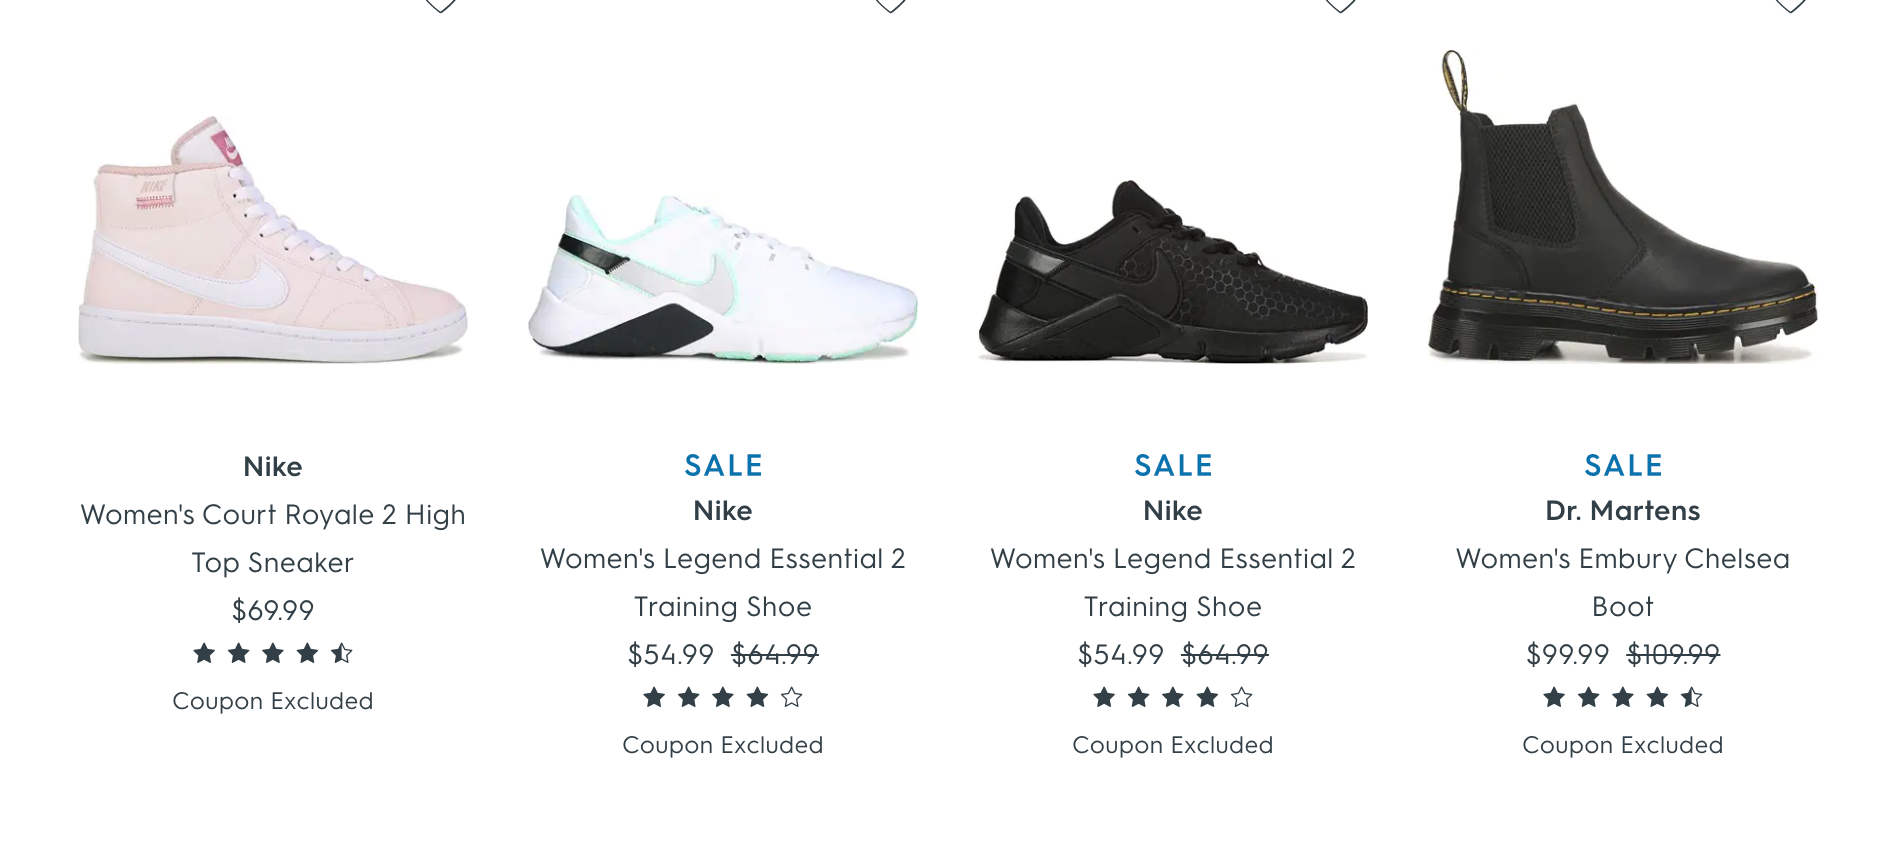 Screenshot of Famous Footwear main product images for a sneaker, a shoe, another shoe, and a boot